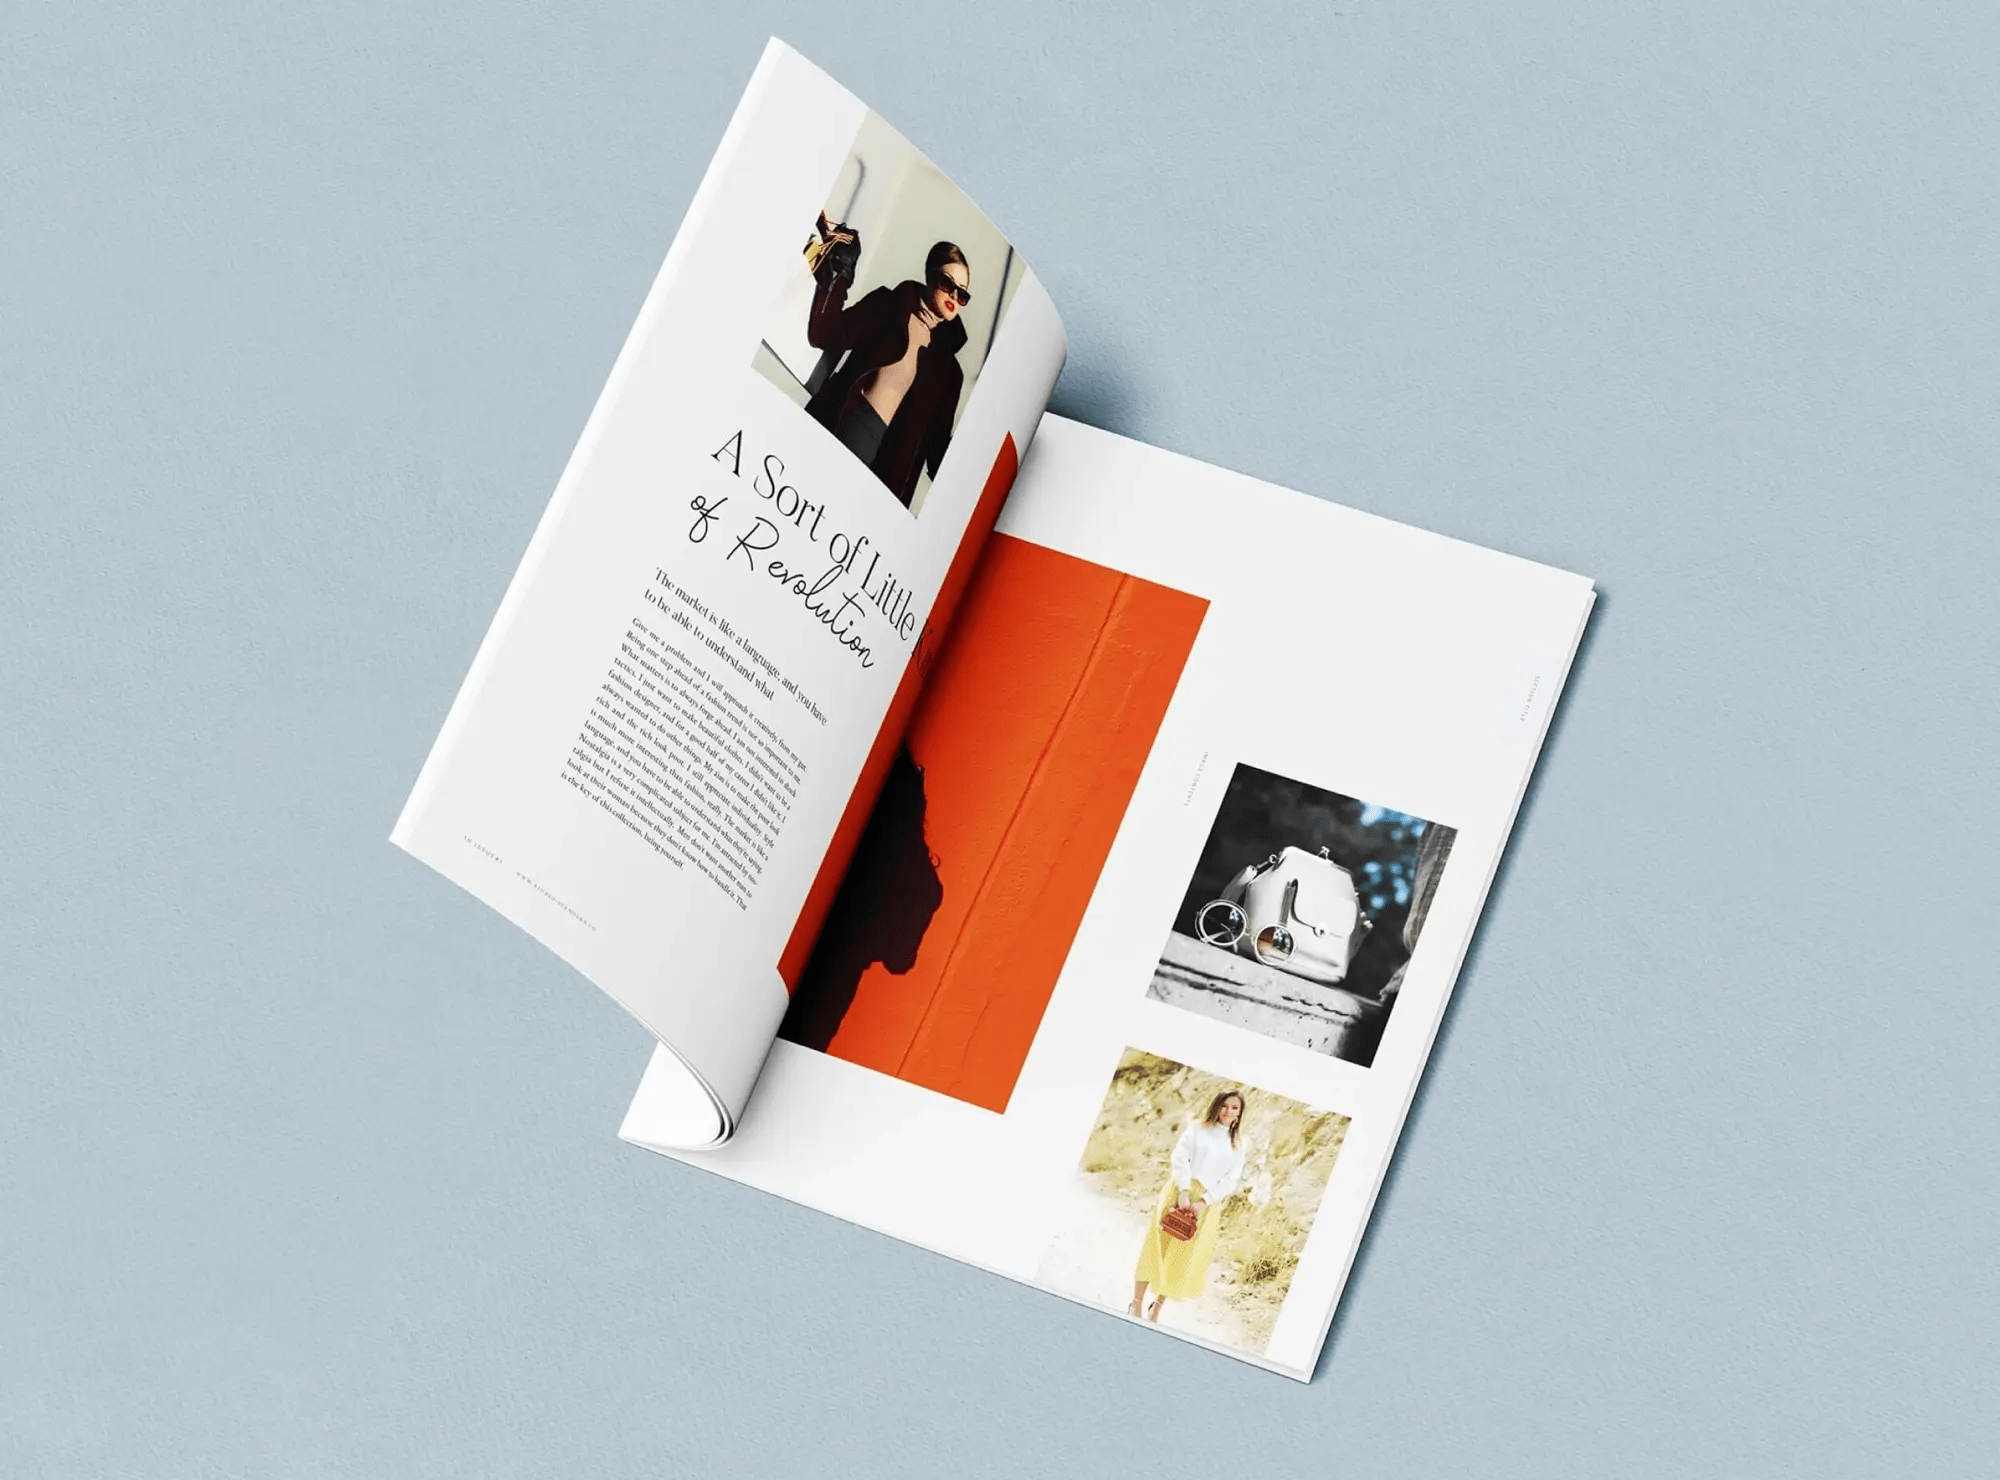 Stylish open magazine mockup displaying inner pages design on a clean background